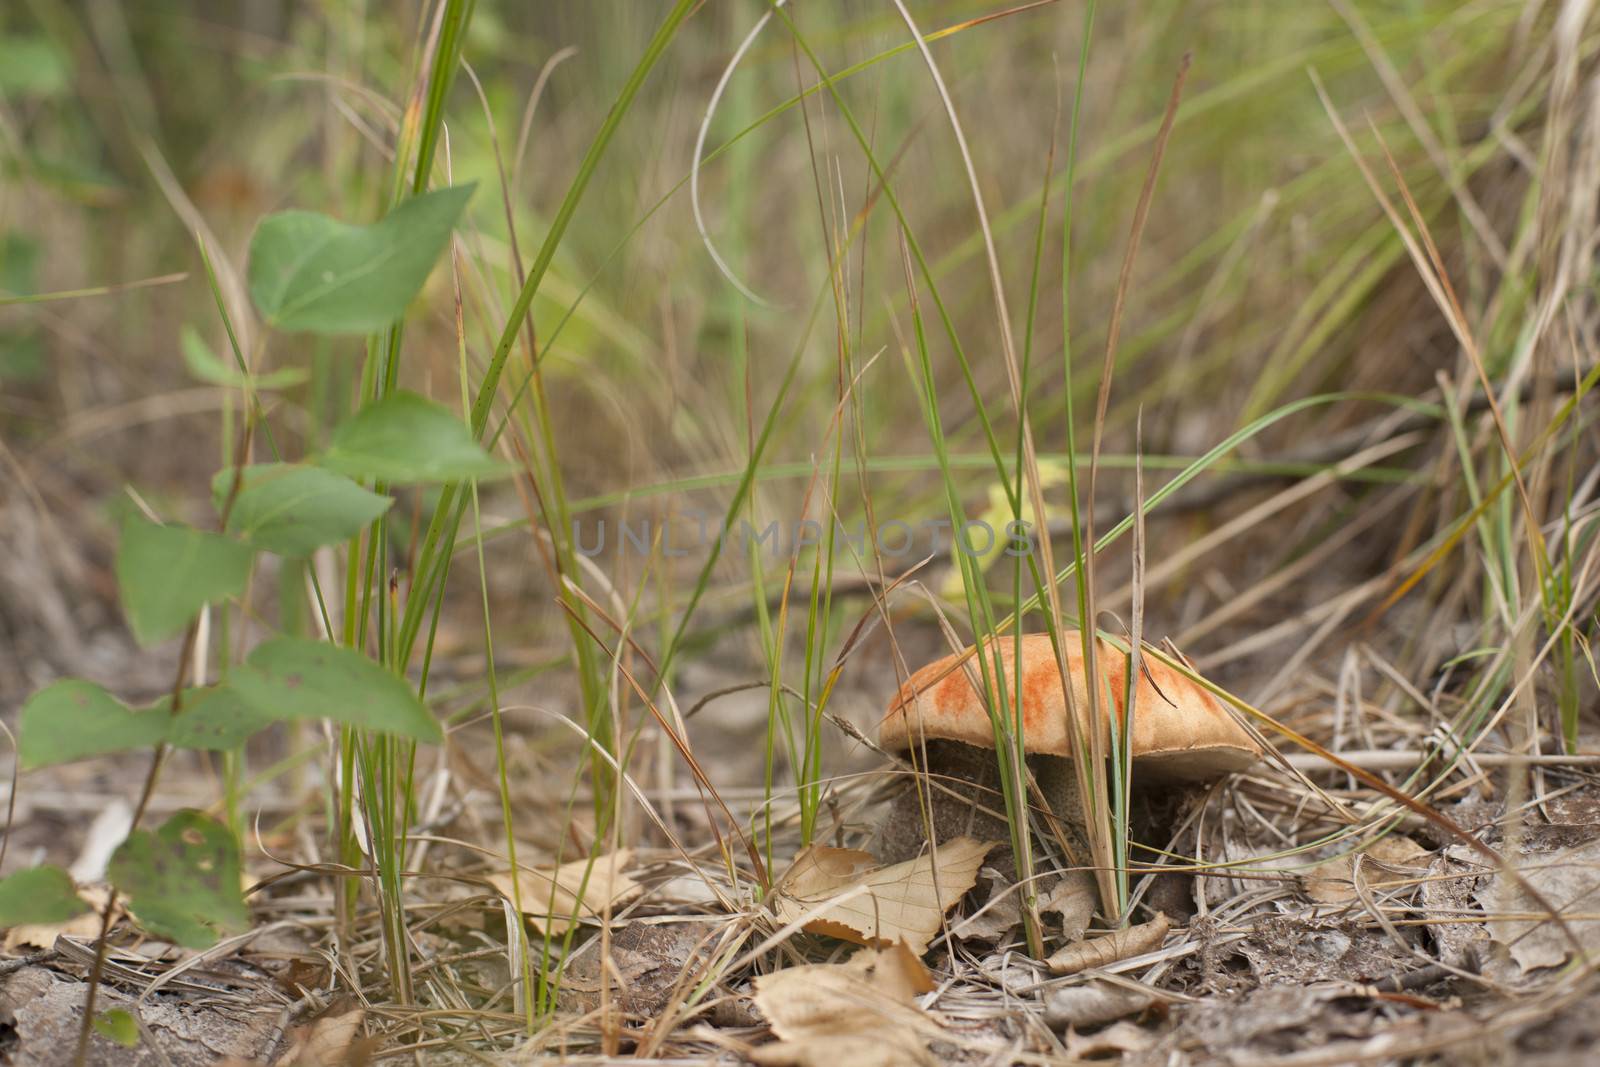 Forest mushrooms in the grass